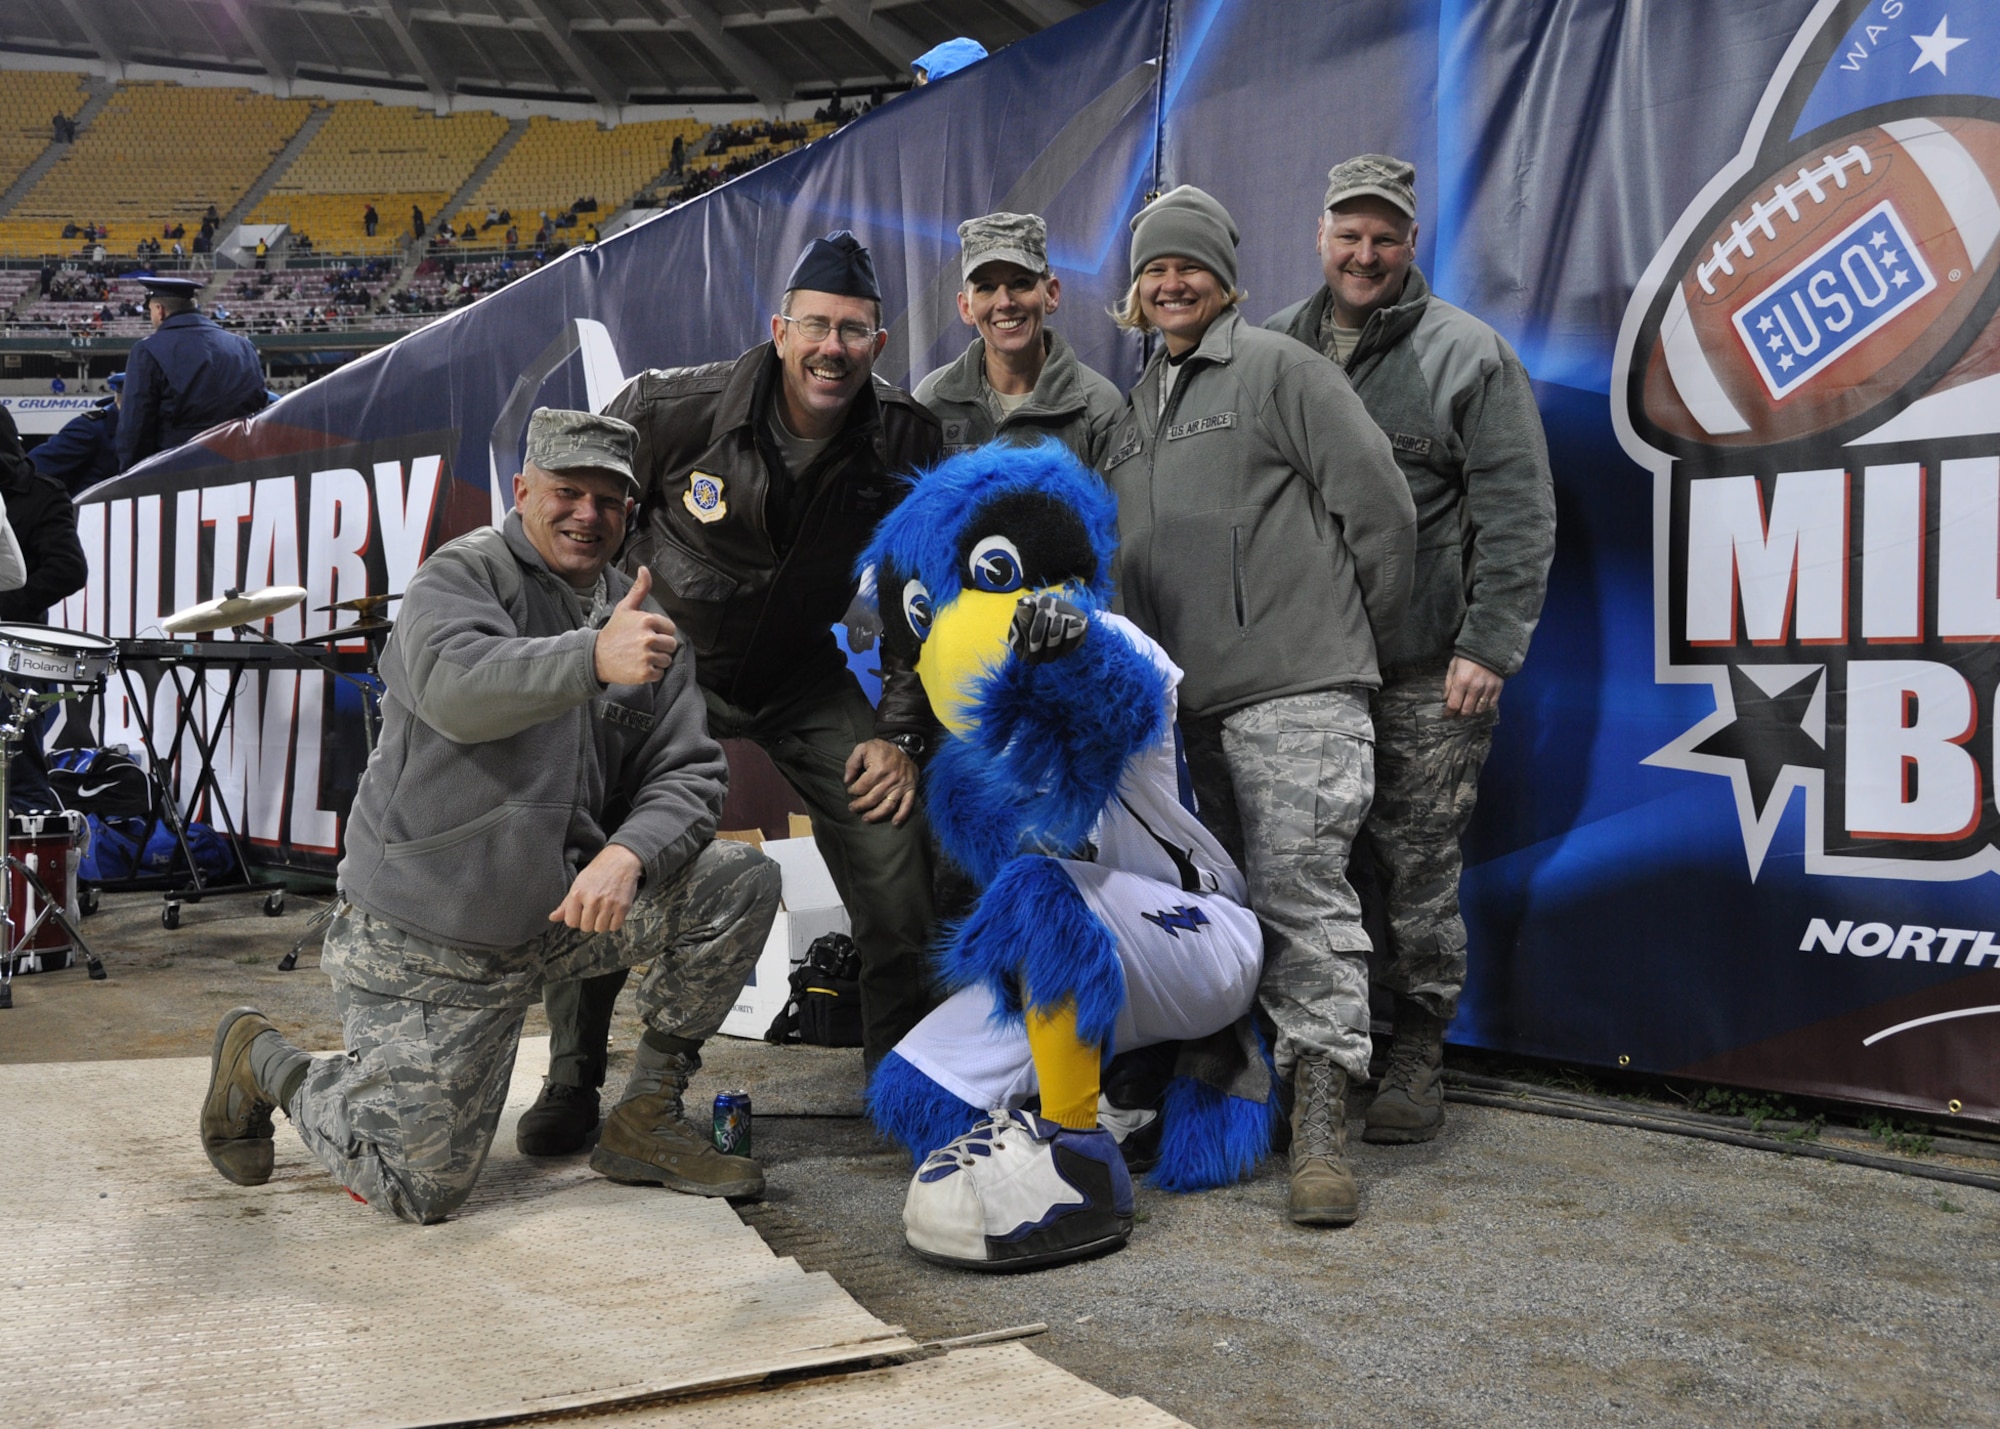 Airman from the 315th Airlift Wing assigned to Joint Base Charleston, S.C. take a moment to pose with the Air Force Academy's Falcon mascot at the 2011 Military Bowl at Robert F. Kennedy Stadium Dec. 28, 2011 in Washington, D.C. (U.S. Air Force photo/Senior Airman Bobby Pilch)